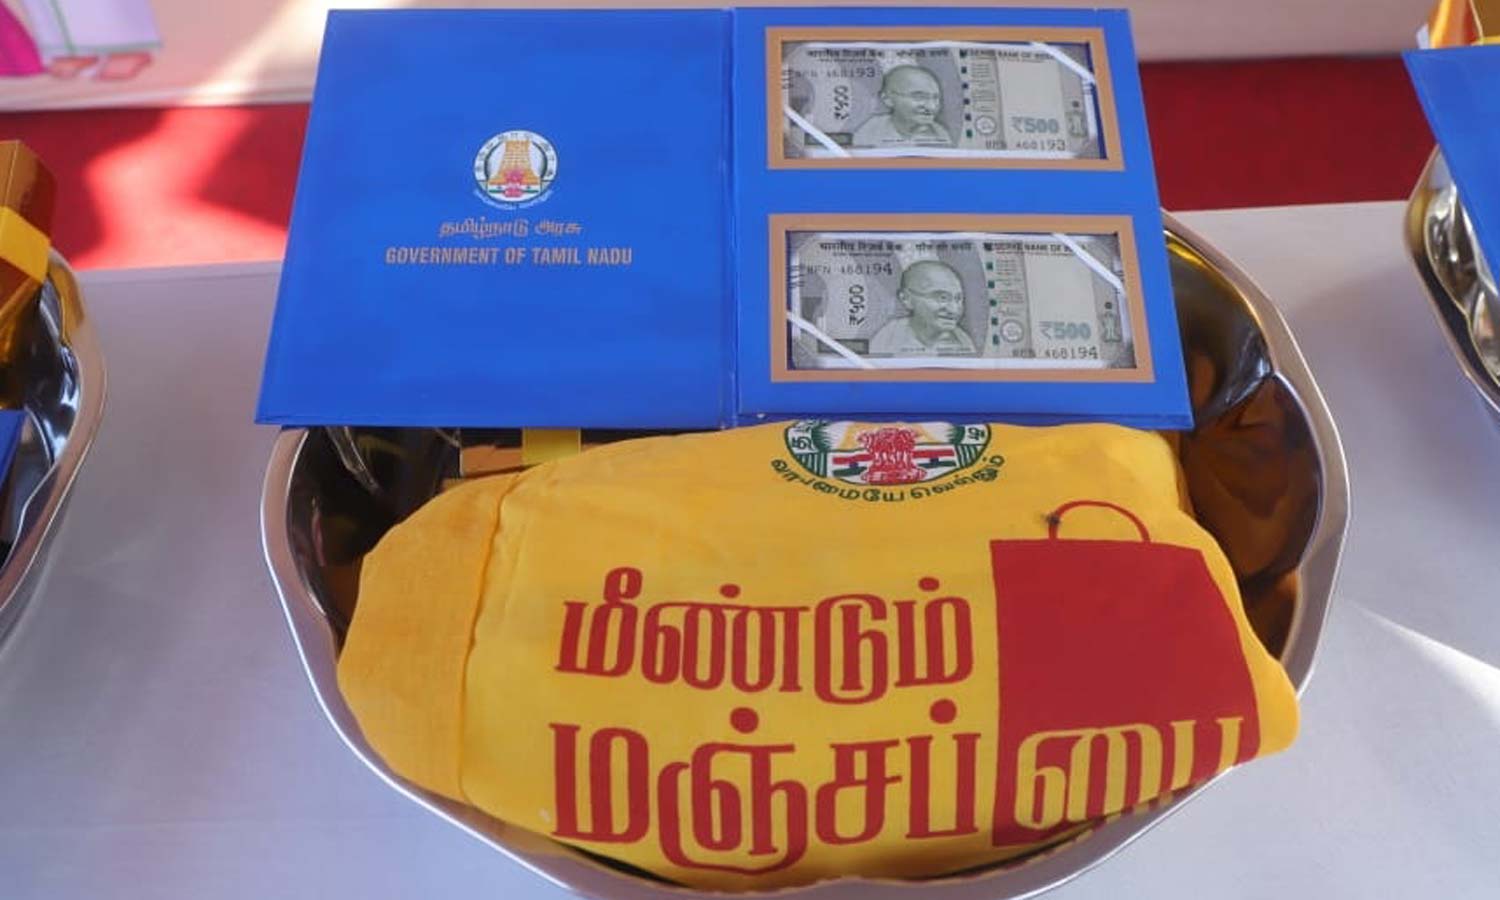 Distribution of Pongal gift of Rs.1000 to 1 crore 70 lakh people across Tamil Nadu in 3 days